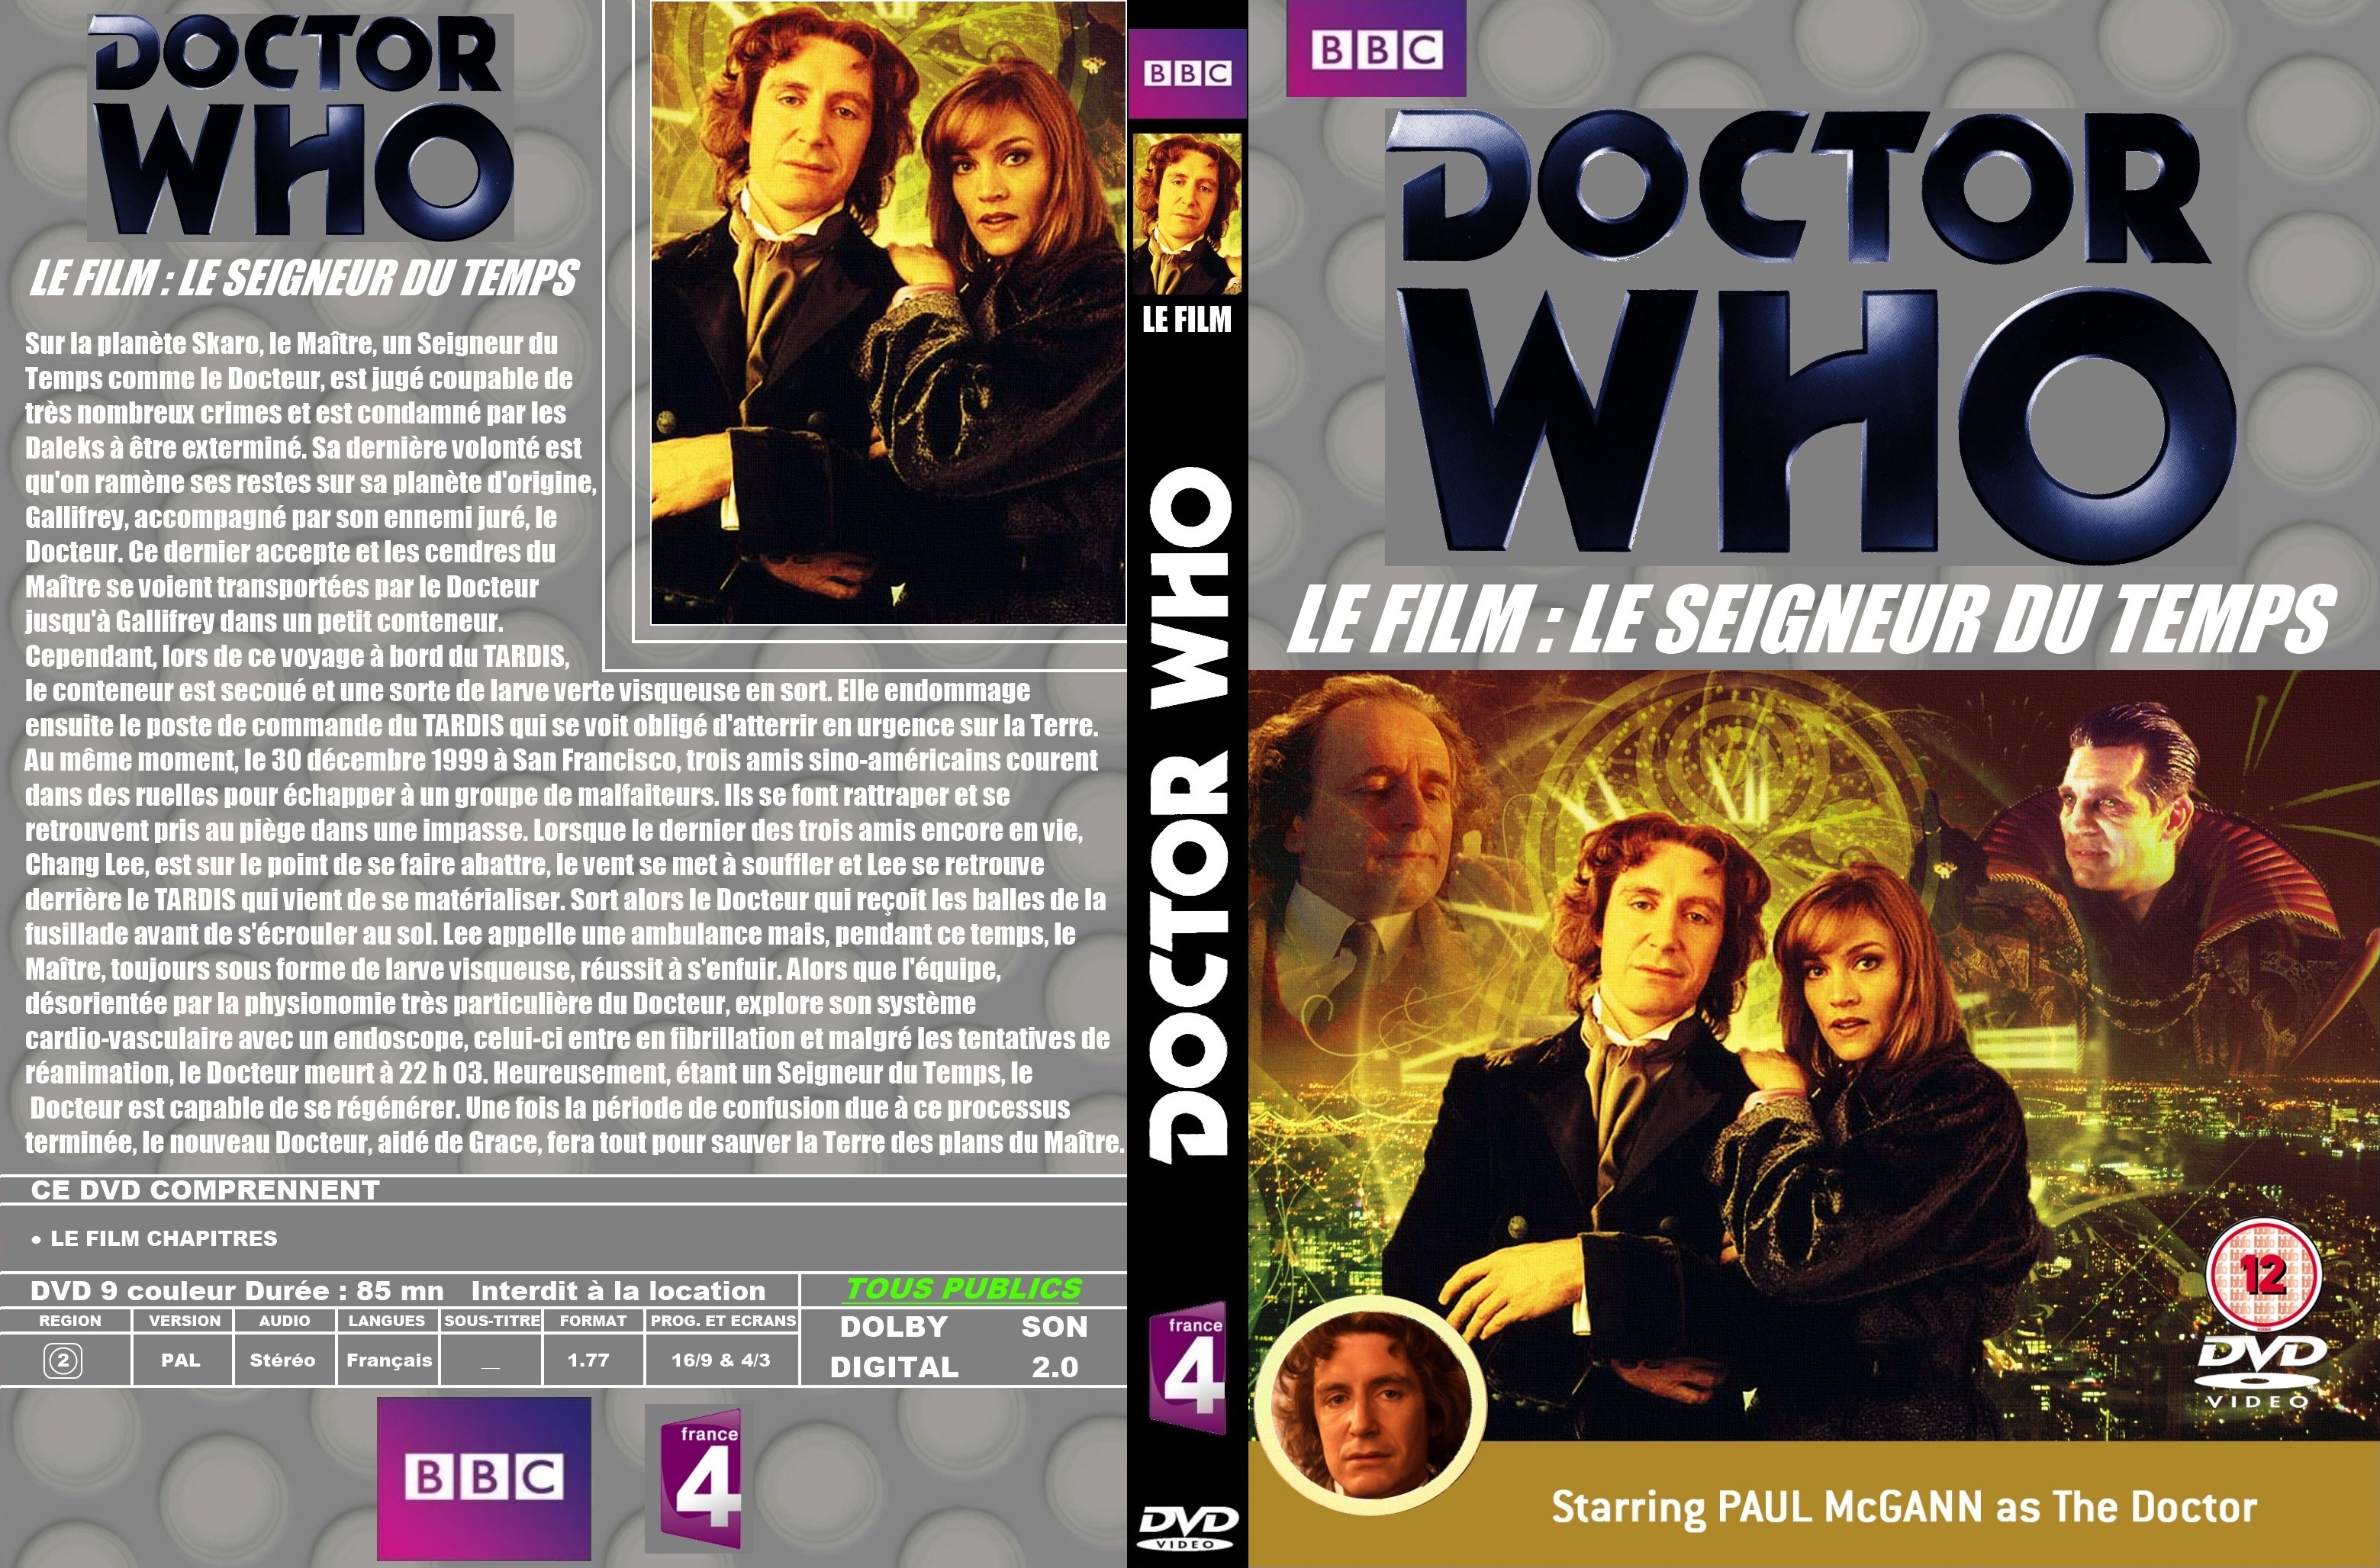 Jaquette DVD Doctor Who Classic Le film custom